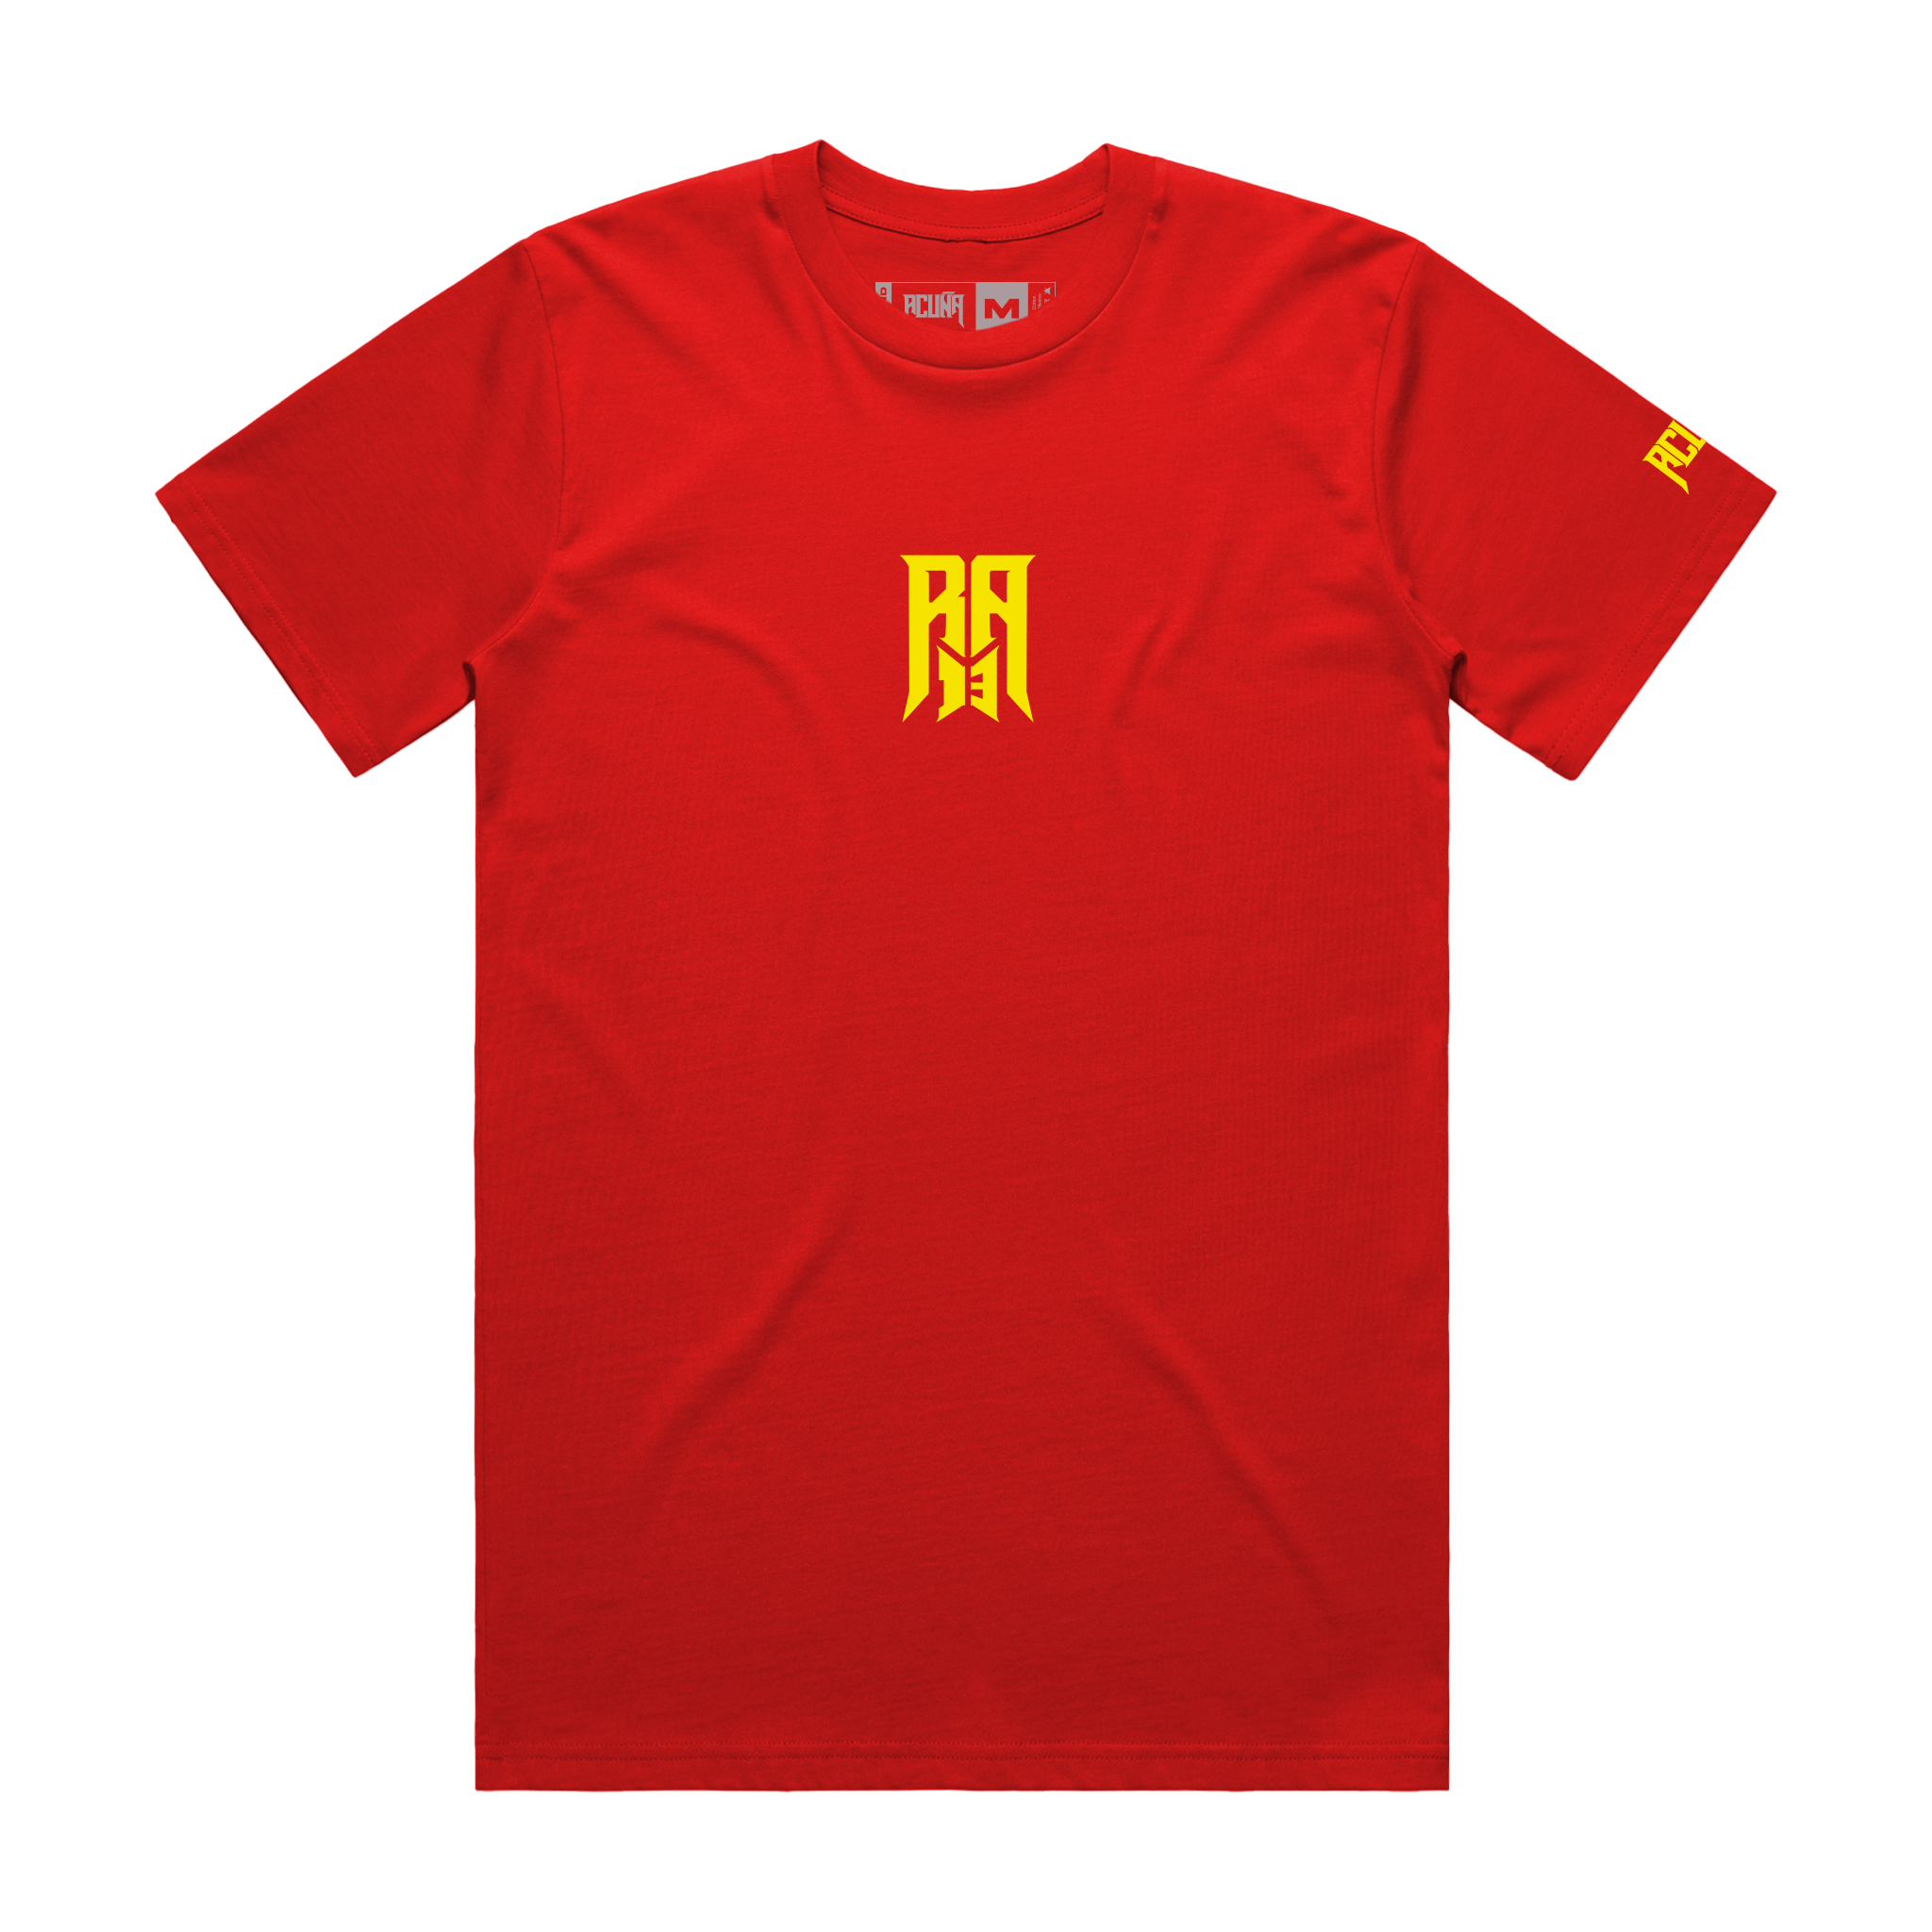 Front image of the Red Crew Neck Tee Shirt with Short Sleeves Featuring "RA13" logo printed in yellow and the acuña logo printed in yellow in the right sleeve